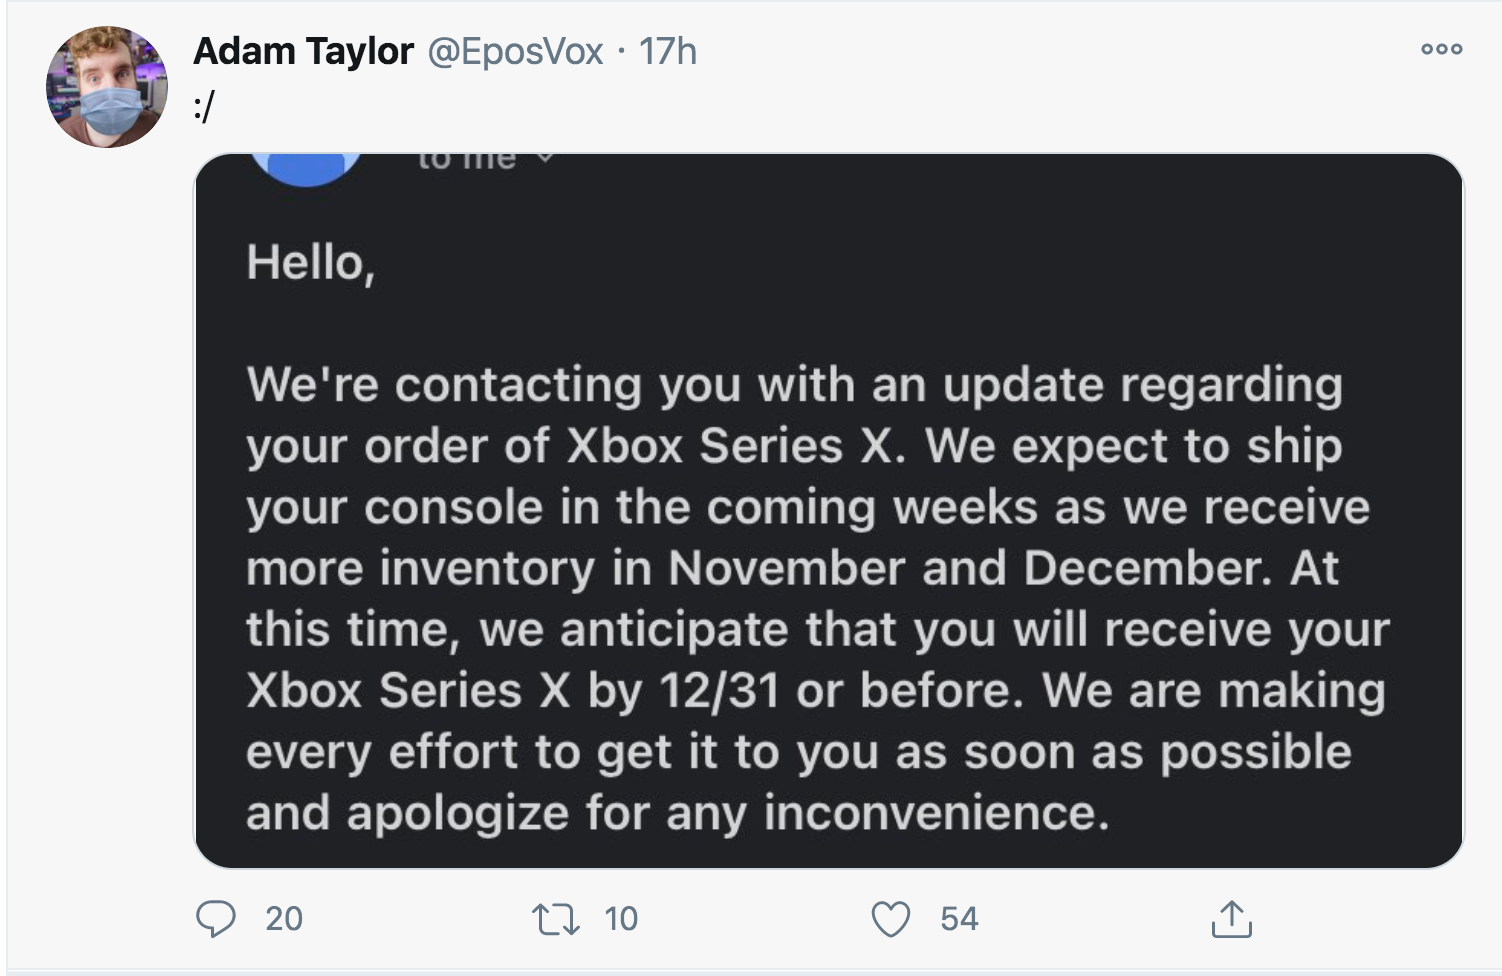 Adam Taylor 17h to me Hello, We're contacting you with an update regarding your order of Xbox Series X. We expect to ship your console in the coming weeks as we receive more inventory in November and December. At this time, we anticipate that y